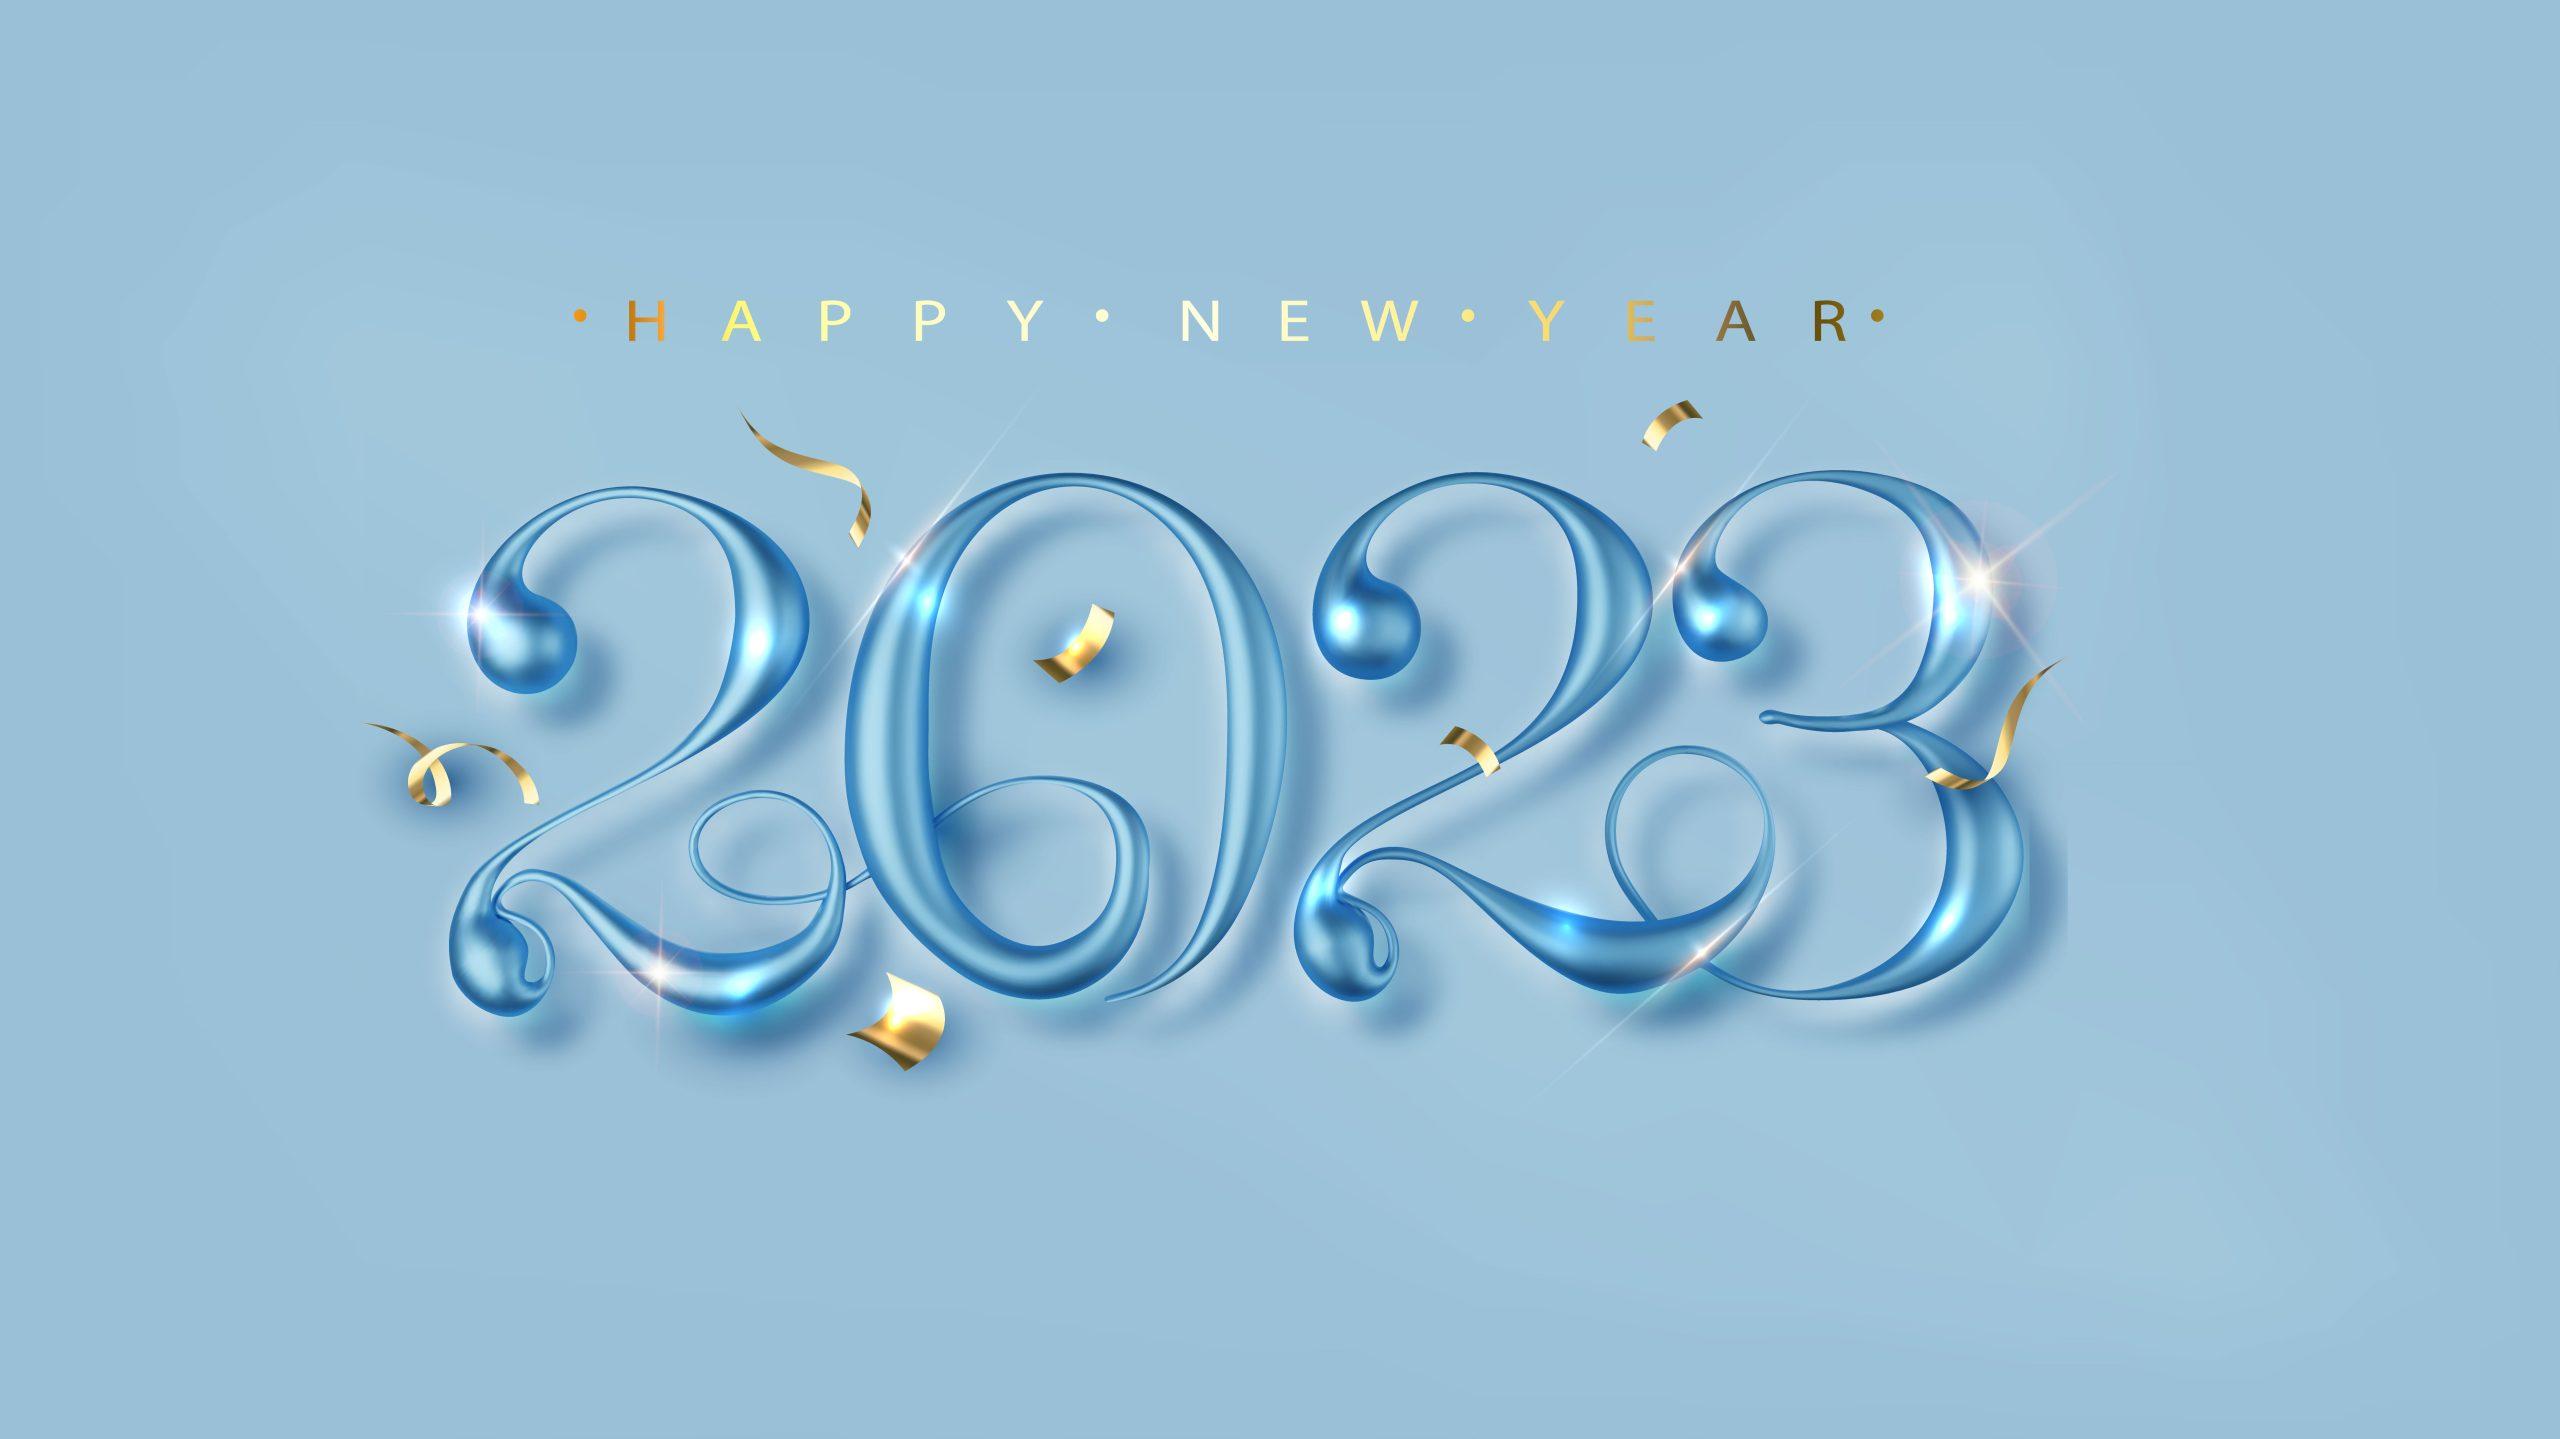 New Year's blue background with graceful numbers for the date 2023